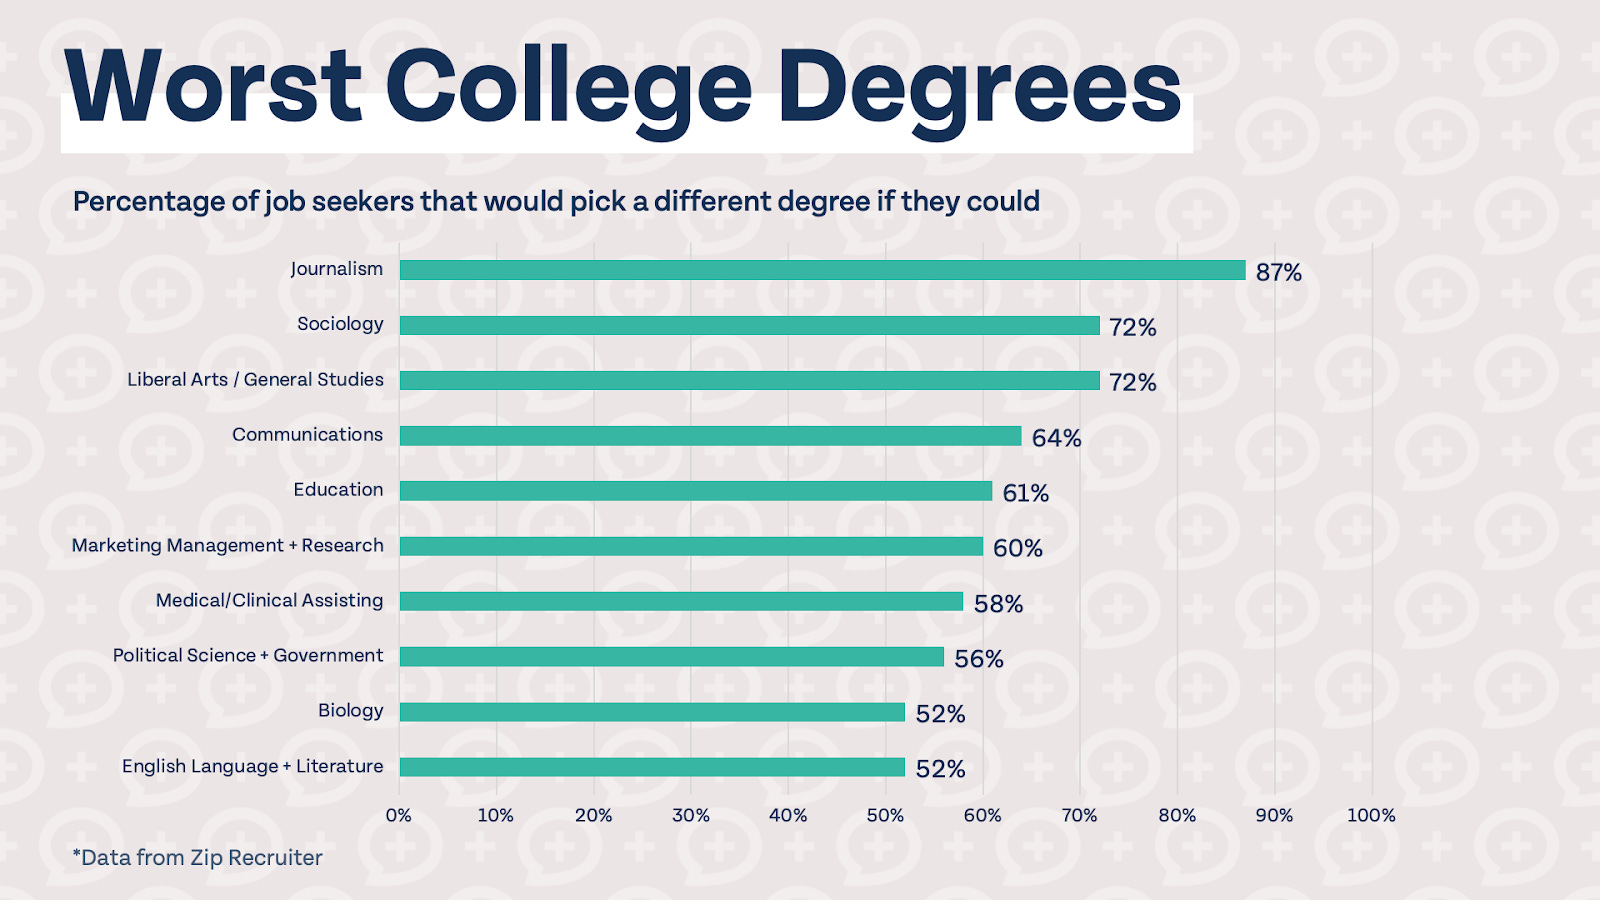 The Most and Least Valuable College Degrees, According to Job Seekers